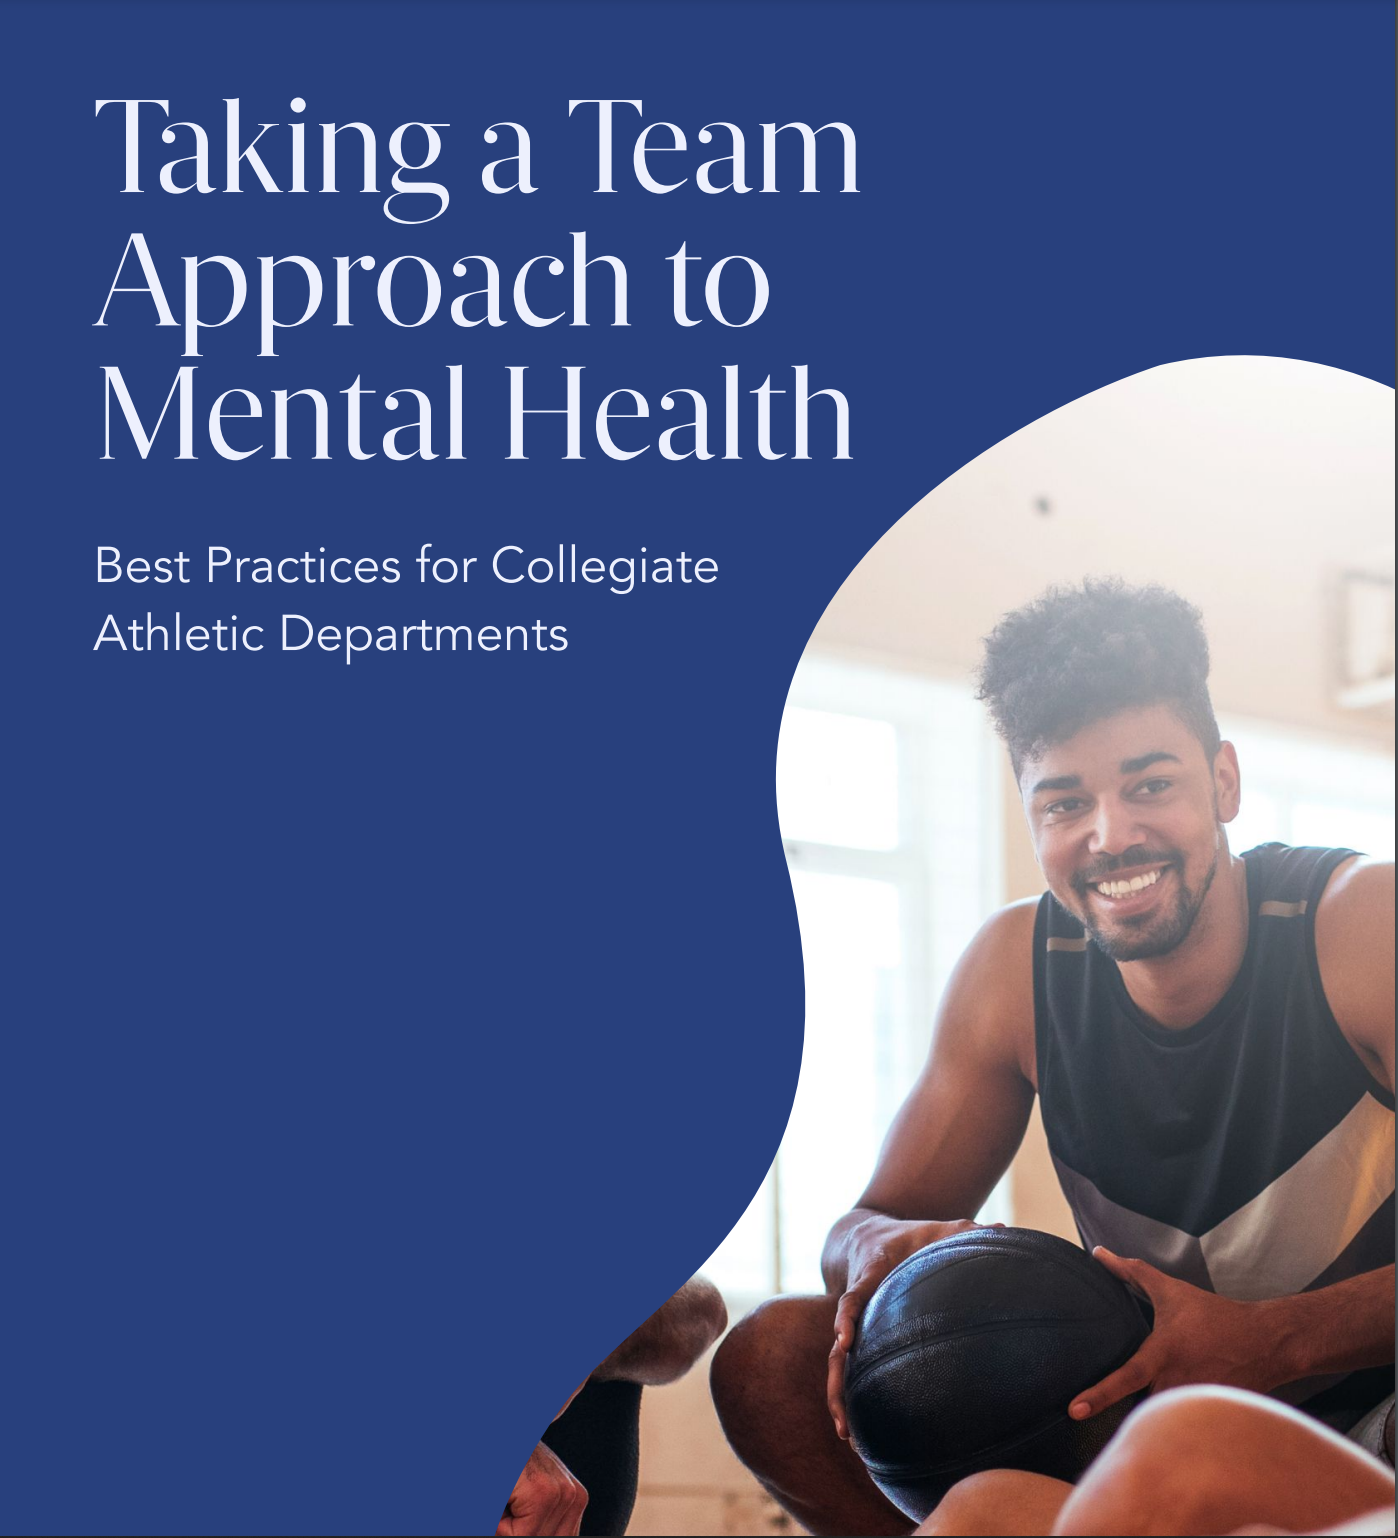 Taking a Team Approach to Mental Health